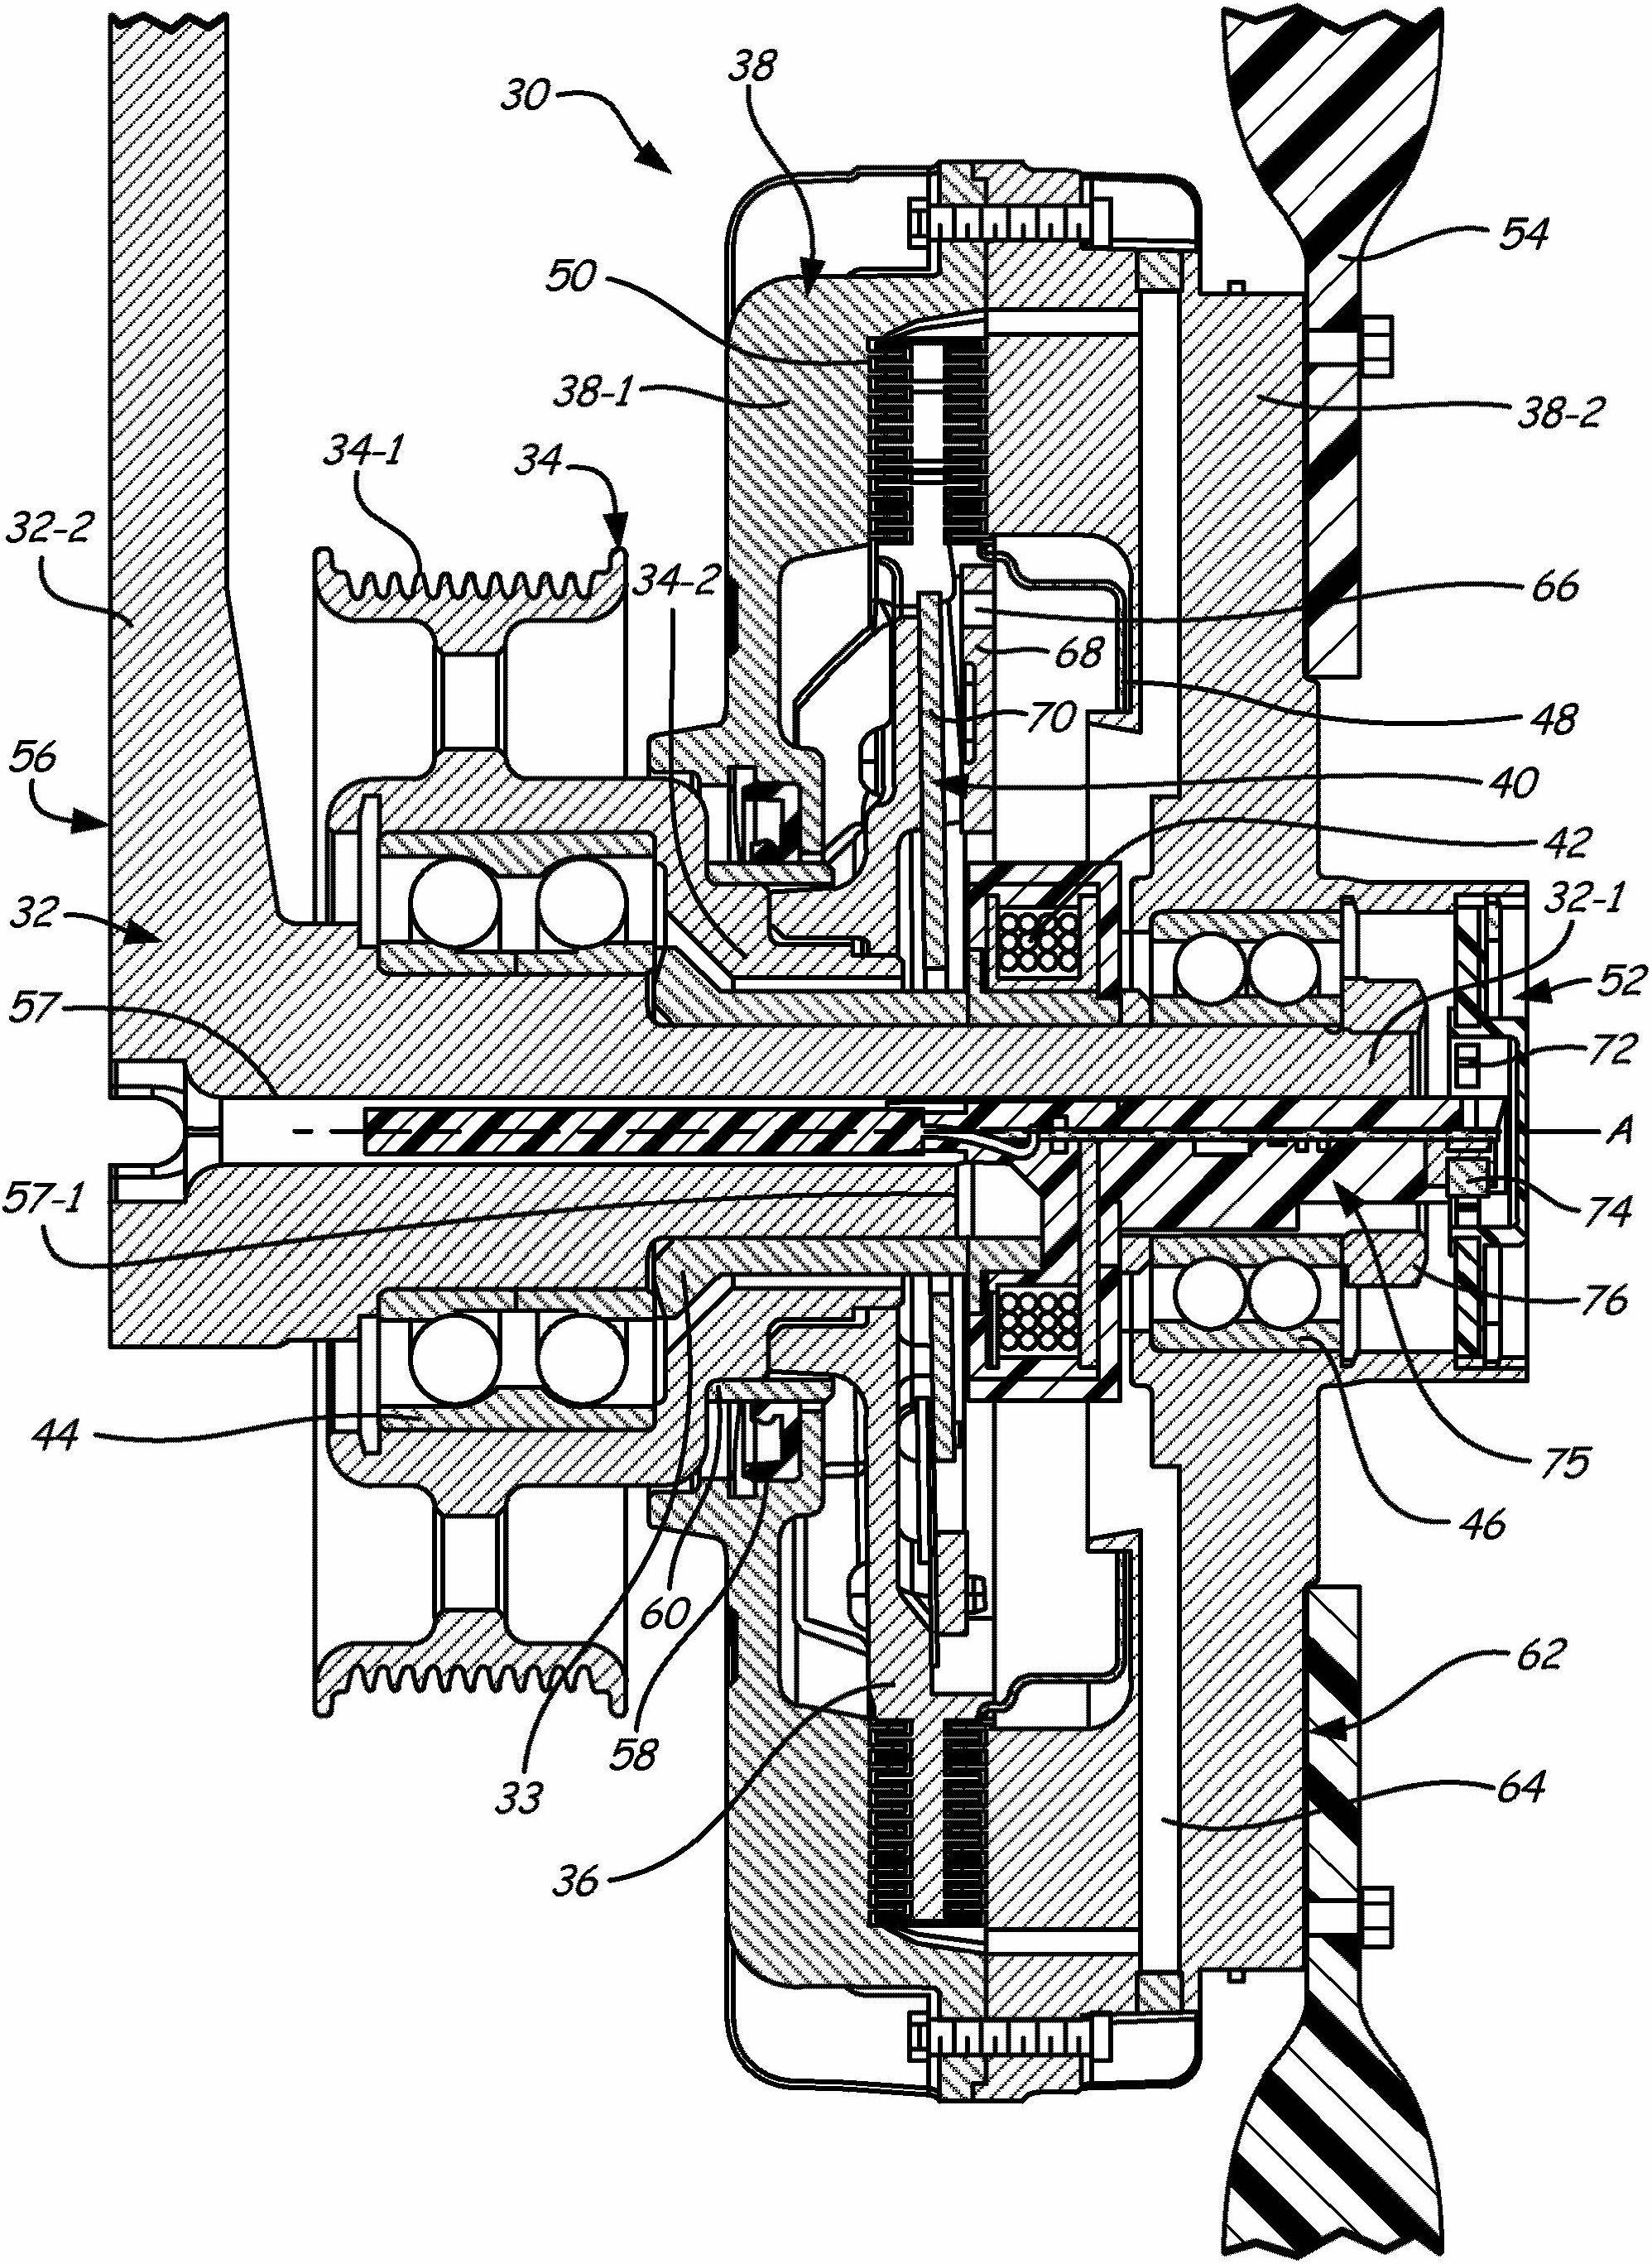 Integrated viscous clutch